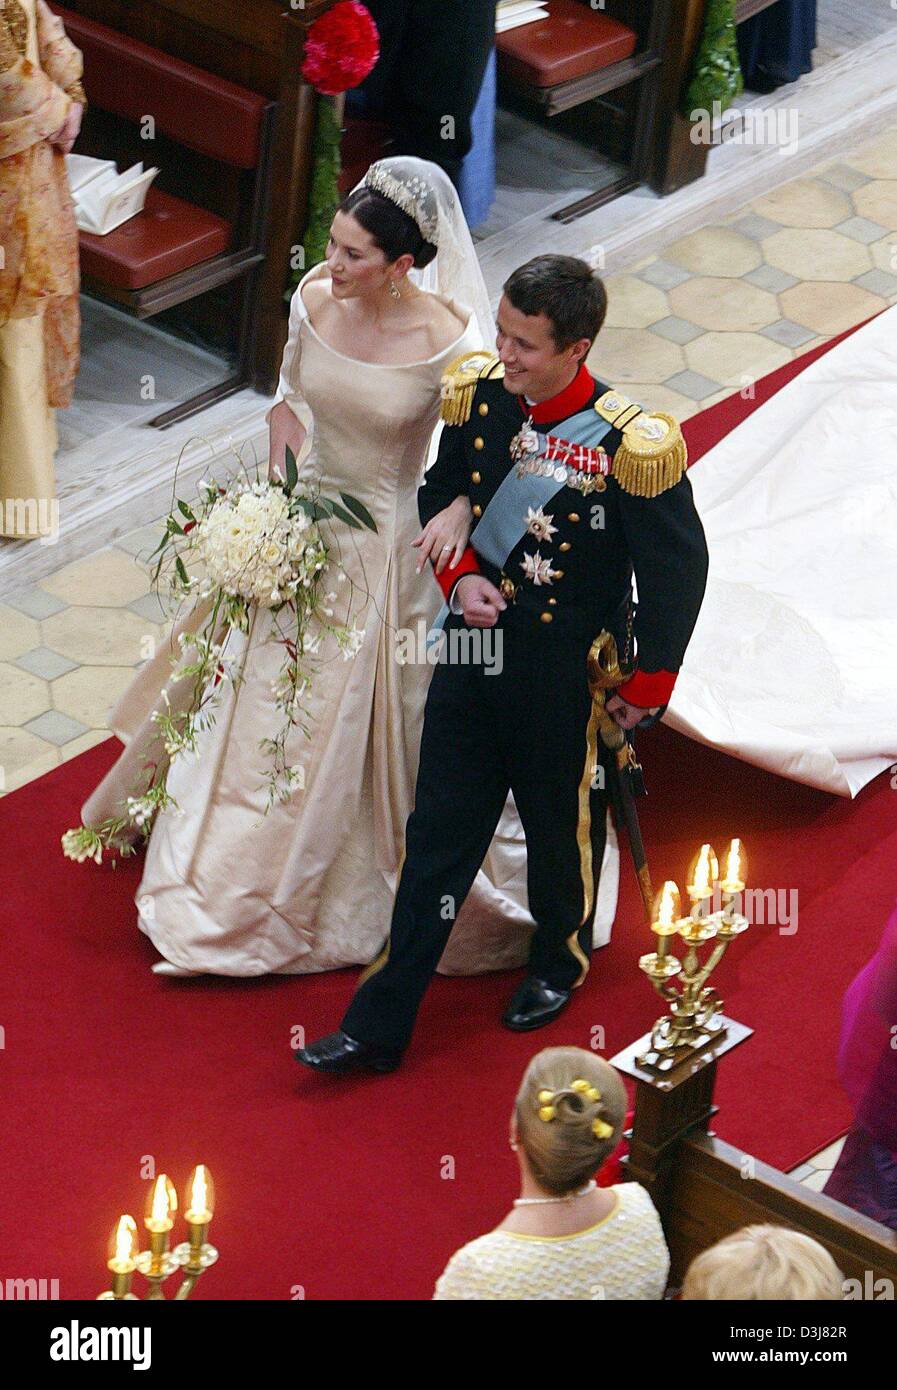 (dpa) - Danish crown prince Frederik (R) and his Mary Donaldson walk down the aisle towards the altar during their wedding at the cathedrale in Copenhagen, Denmark, Friday, 14 May 2004. The church wedding of crown prince Frederik and Mary Donaldson from Australia took place today. Members of all European royal dynasties were among the 800 invited guests who attended the wedding. Th Stock Photo